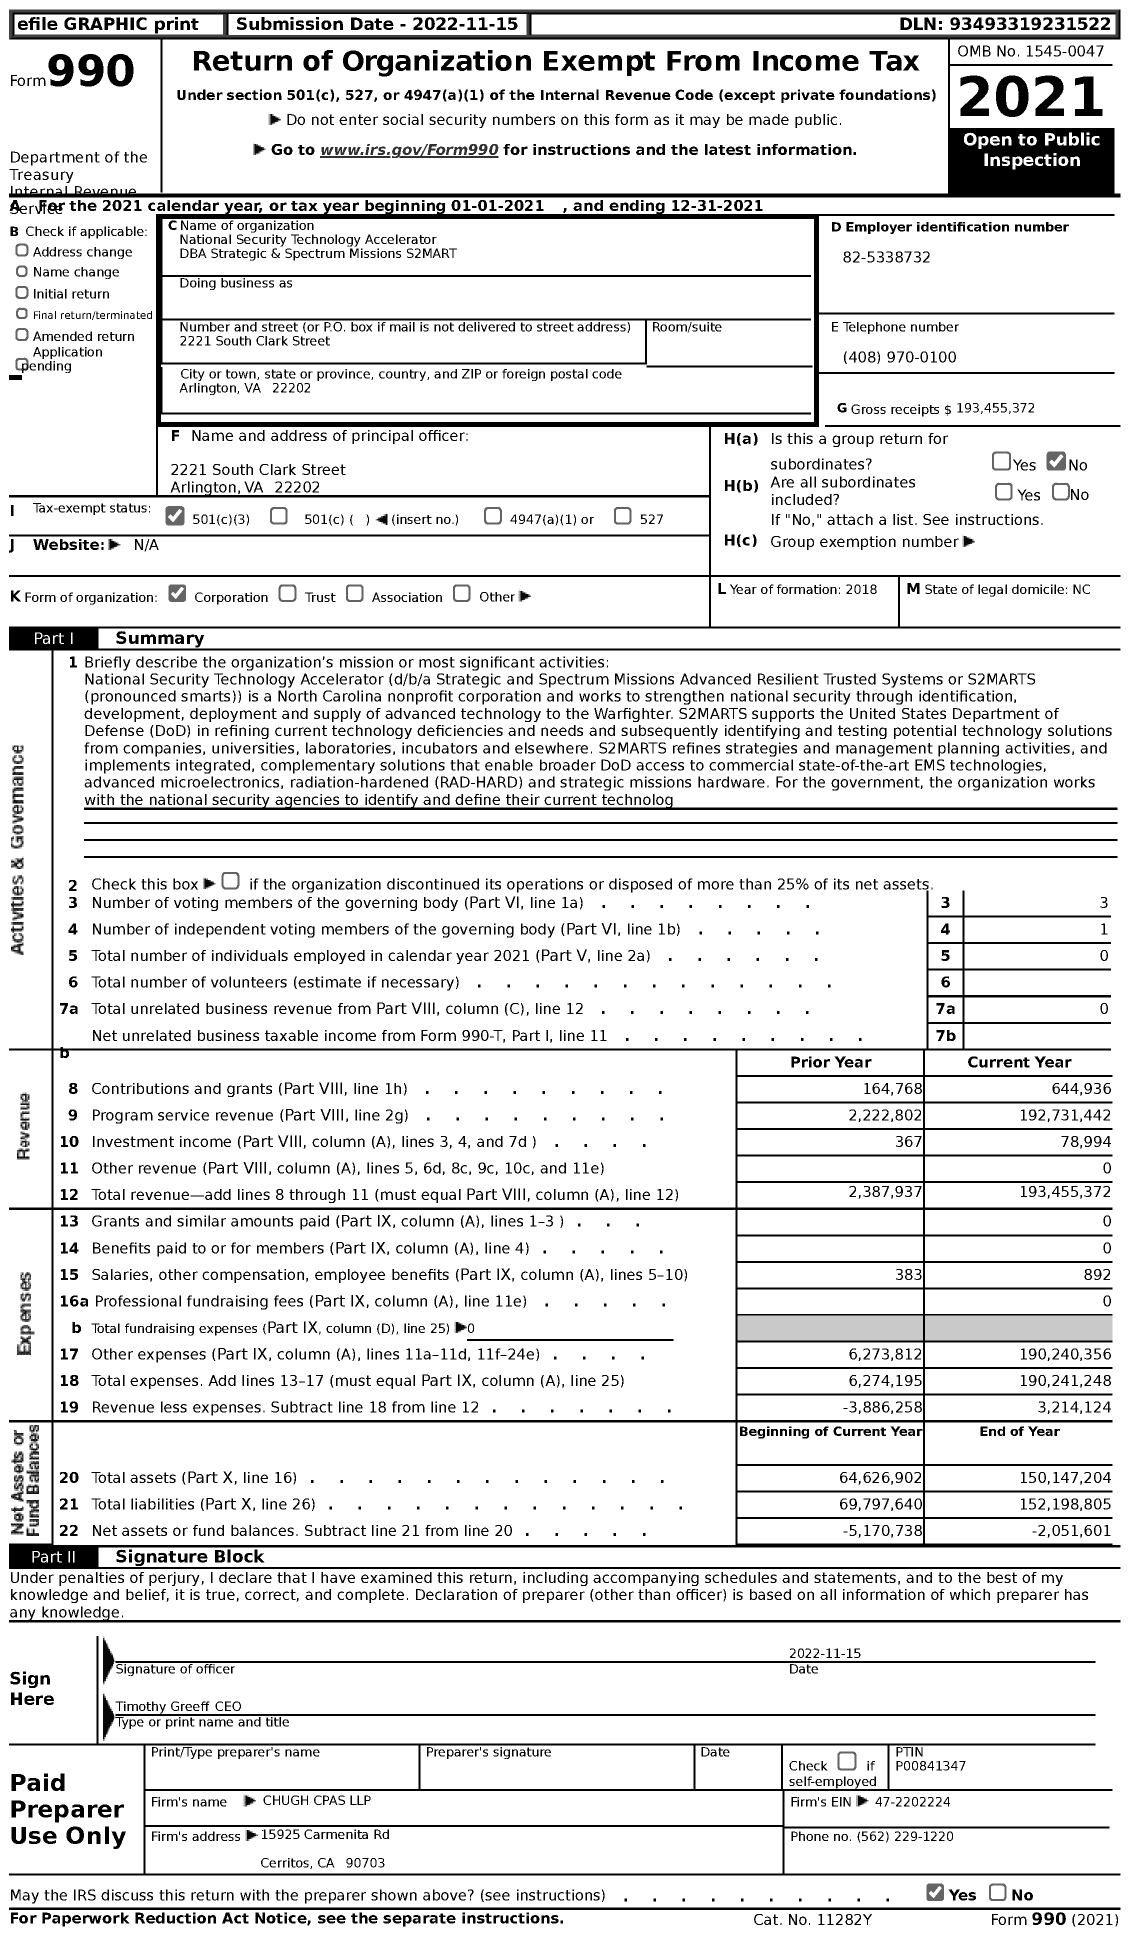 Image of first page of 2021 Form 990 for Strategic and Spectrum Missions S2MART